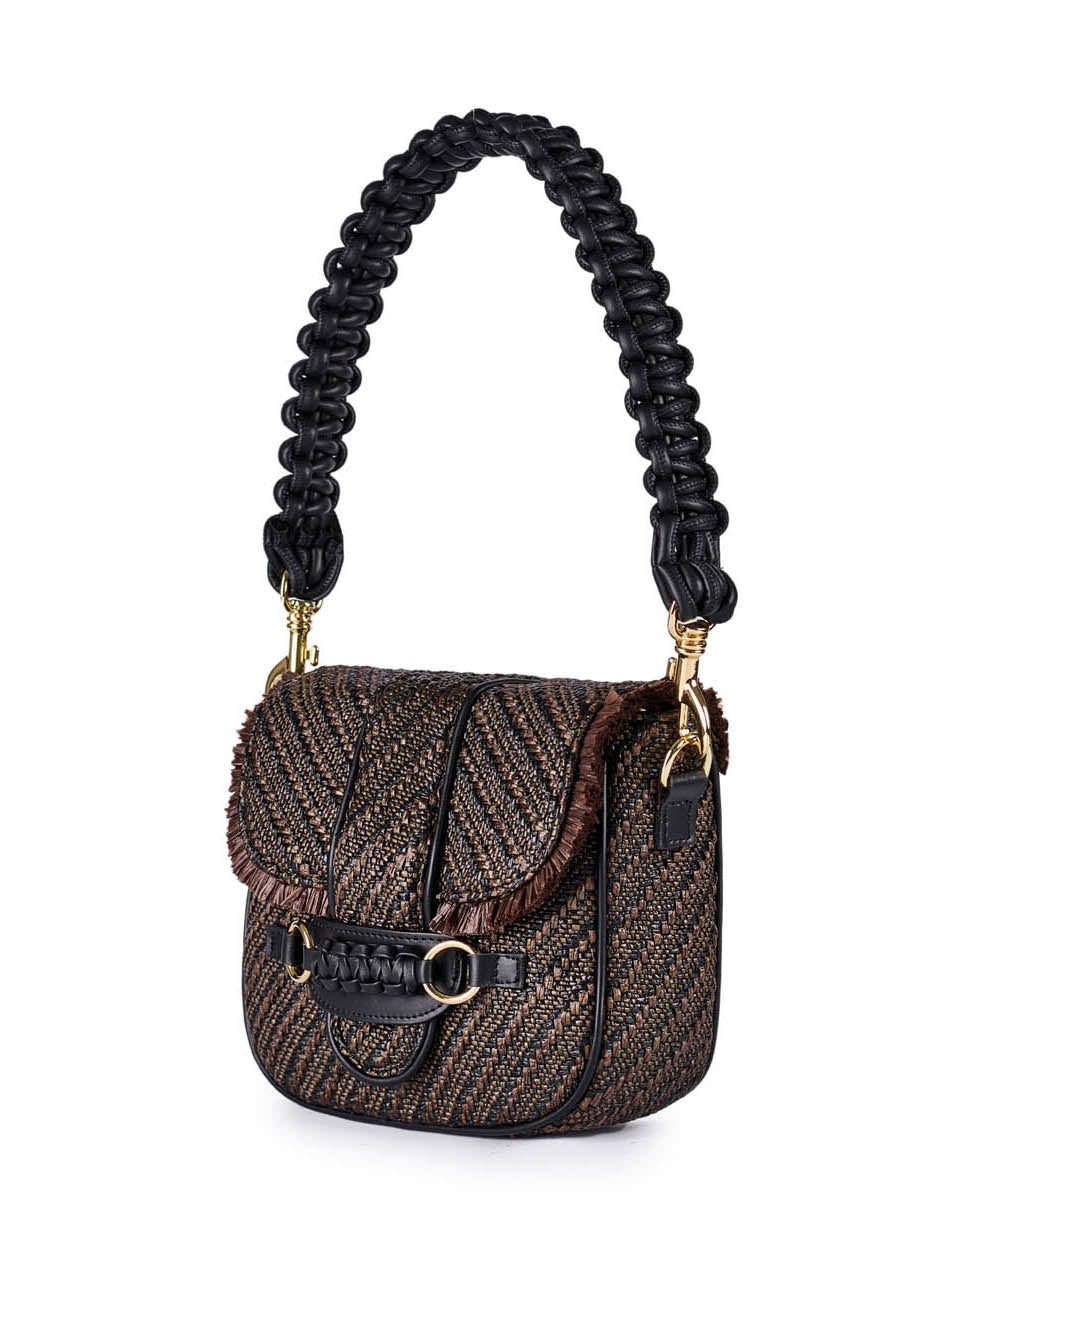 Stylish black and brown woven handbag with braided strap and gold accents